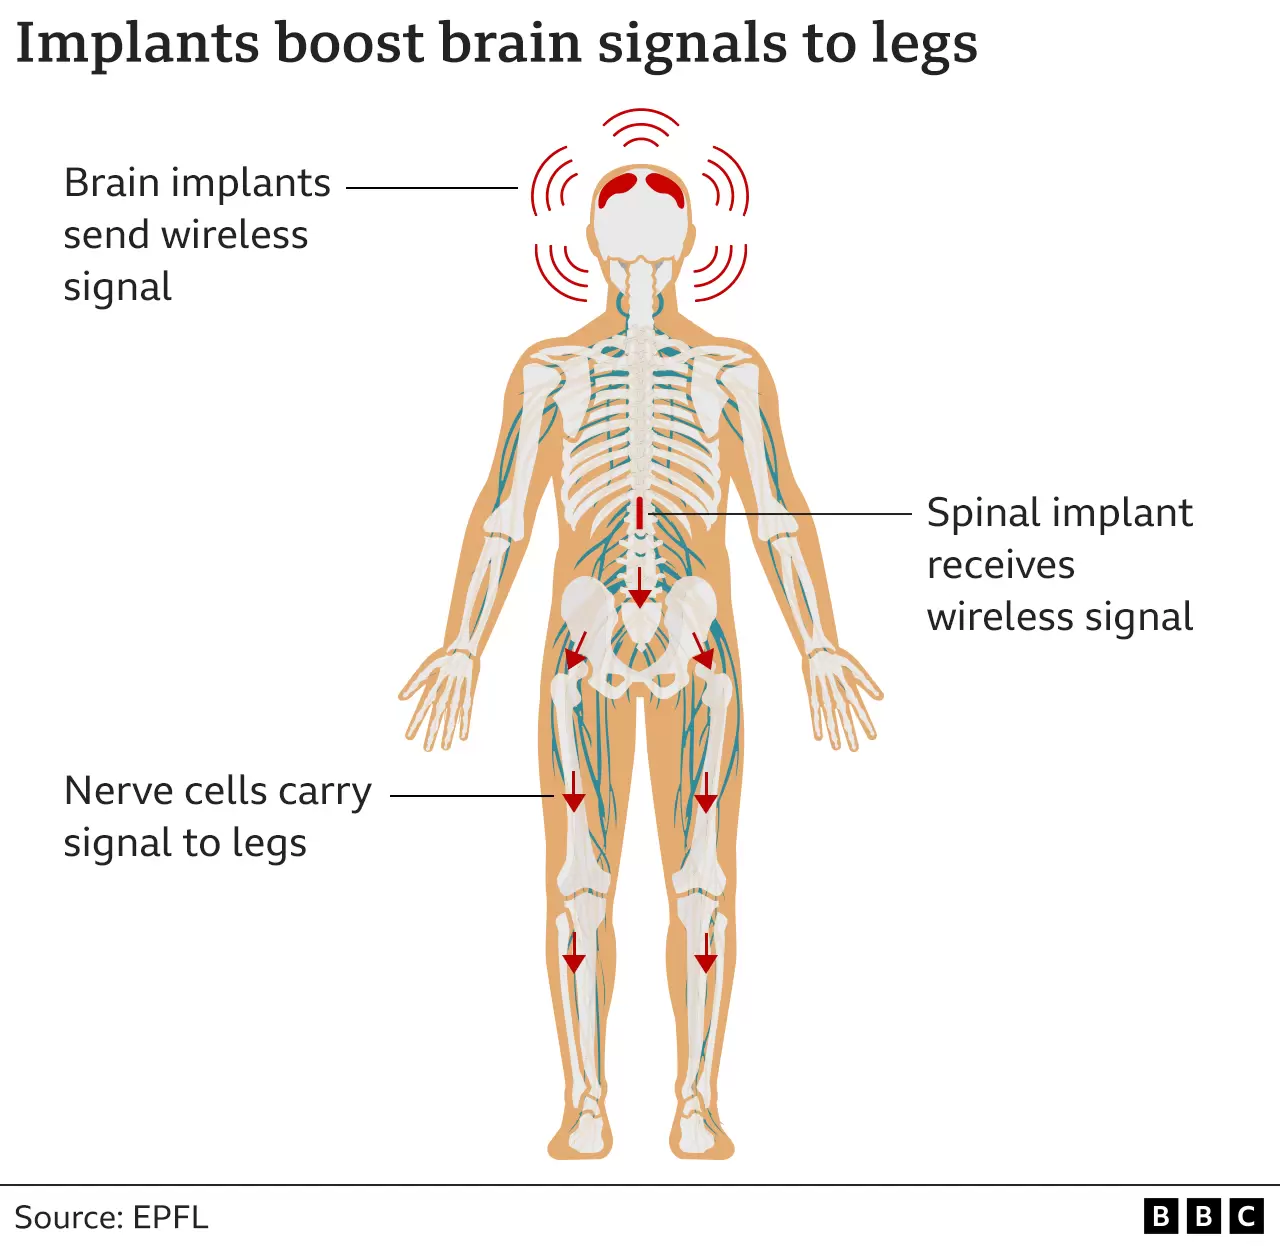 AI acts as a thought decoder and enables brain's signals to bypass damaged parts of the spinal cord to move legs.